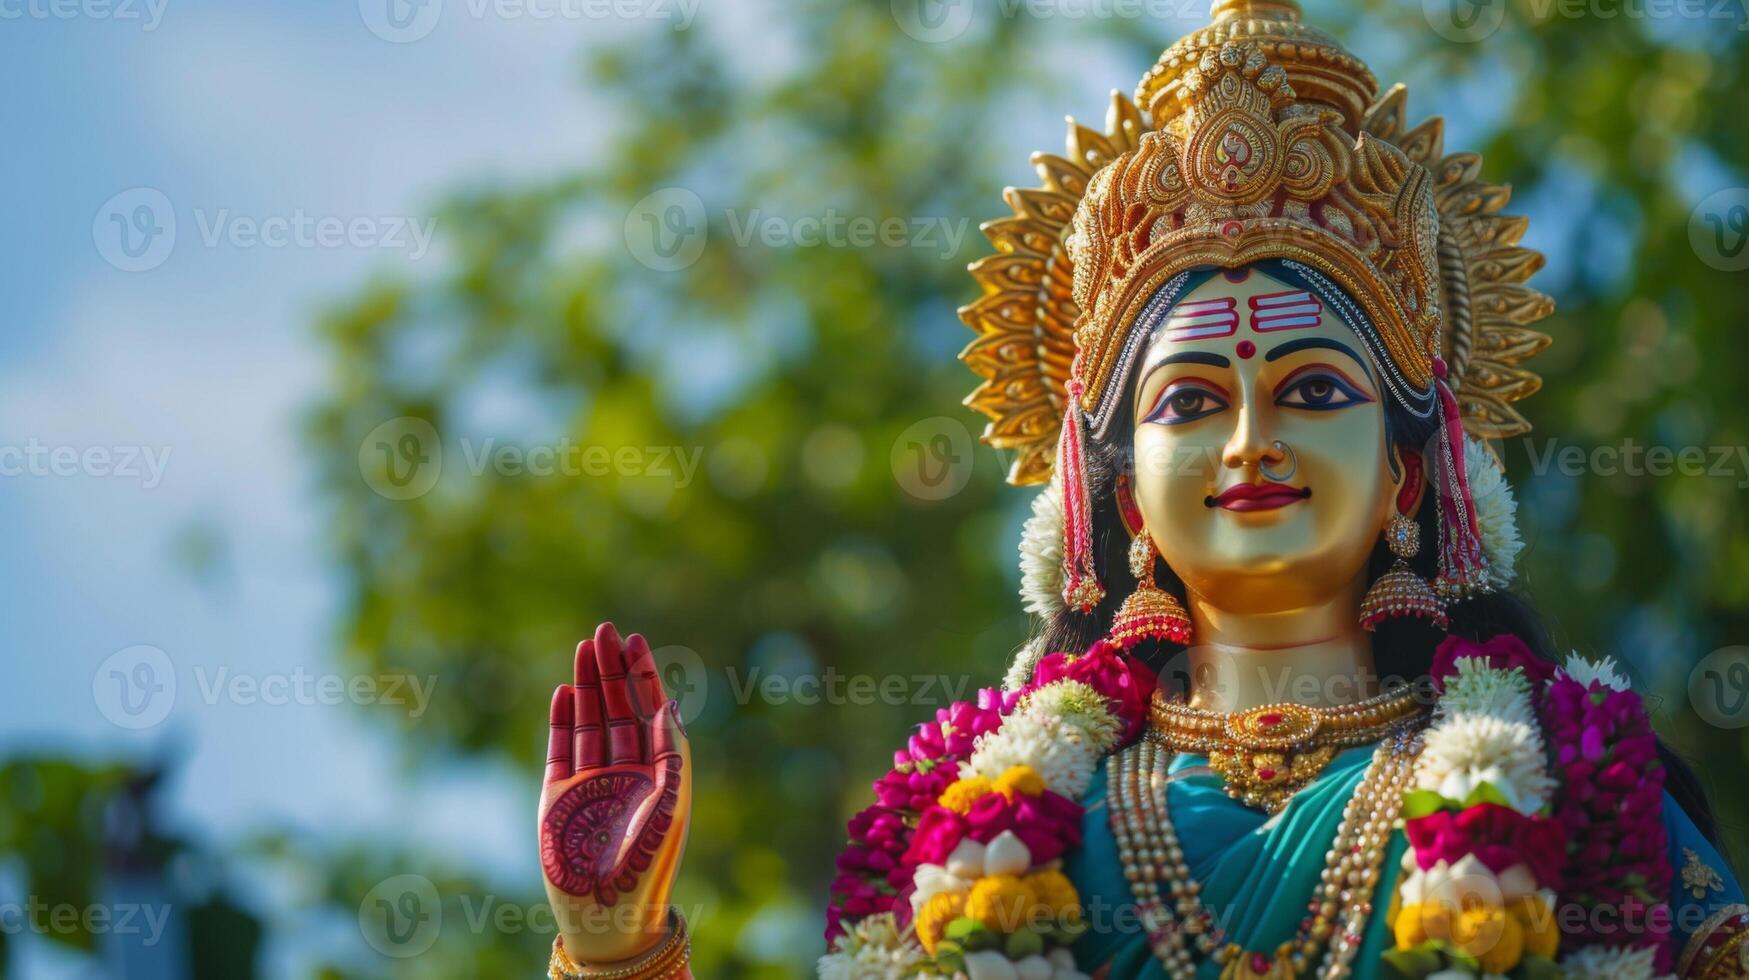 Parvati Hindu deity statue with divine cultural and religious significance adorned in festival attire photo